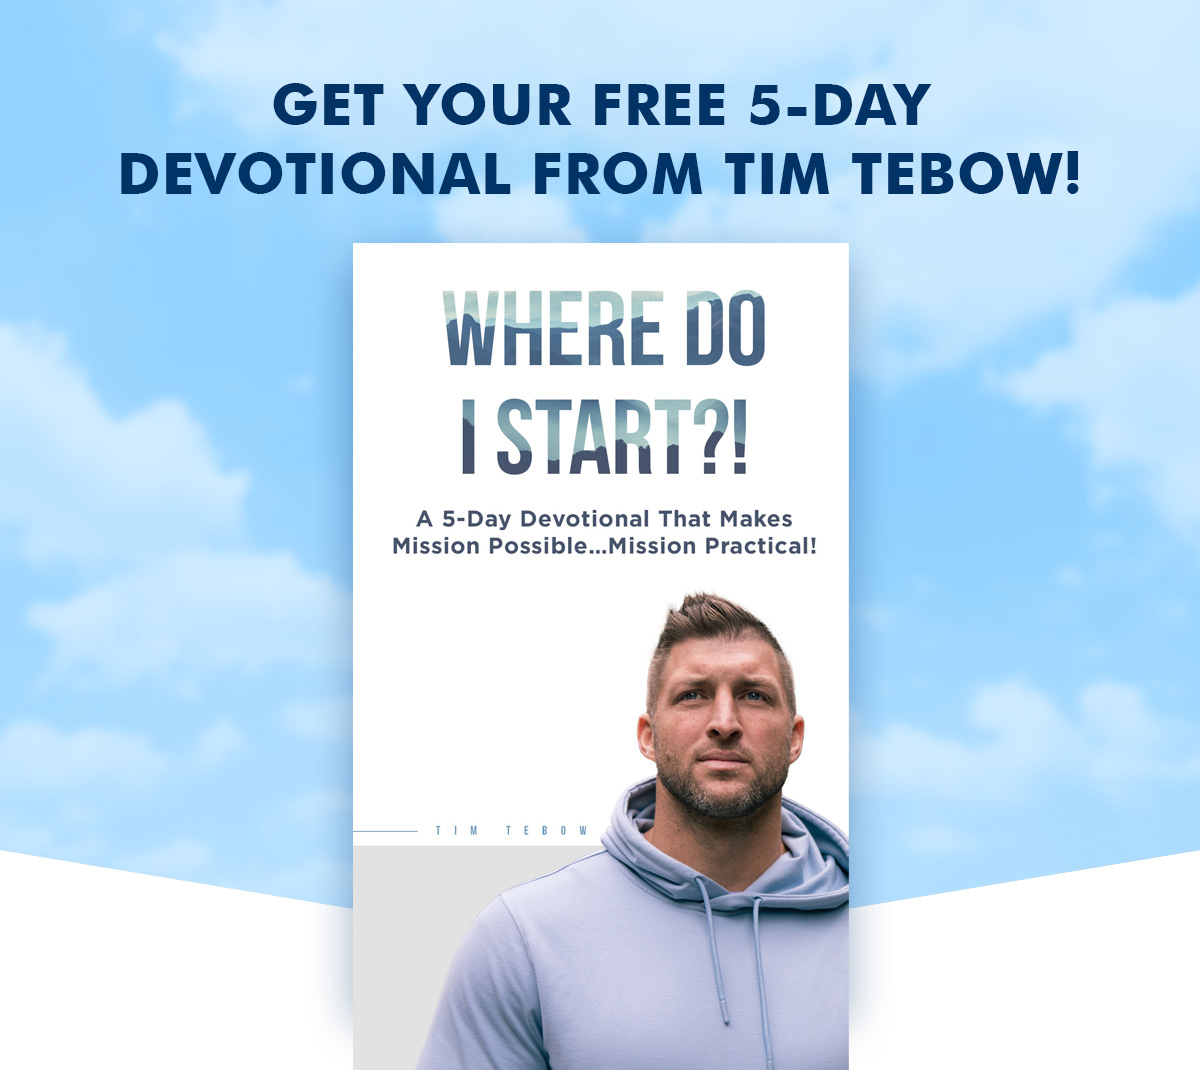 Get your free devotional from the Tim Tebow Foundation